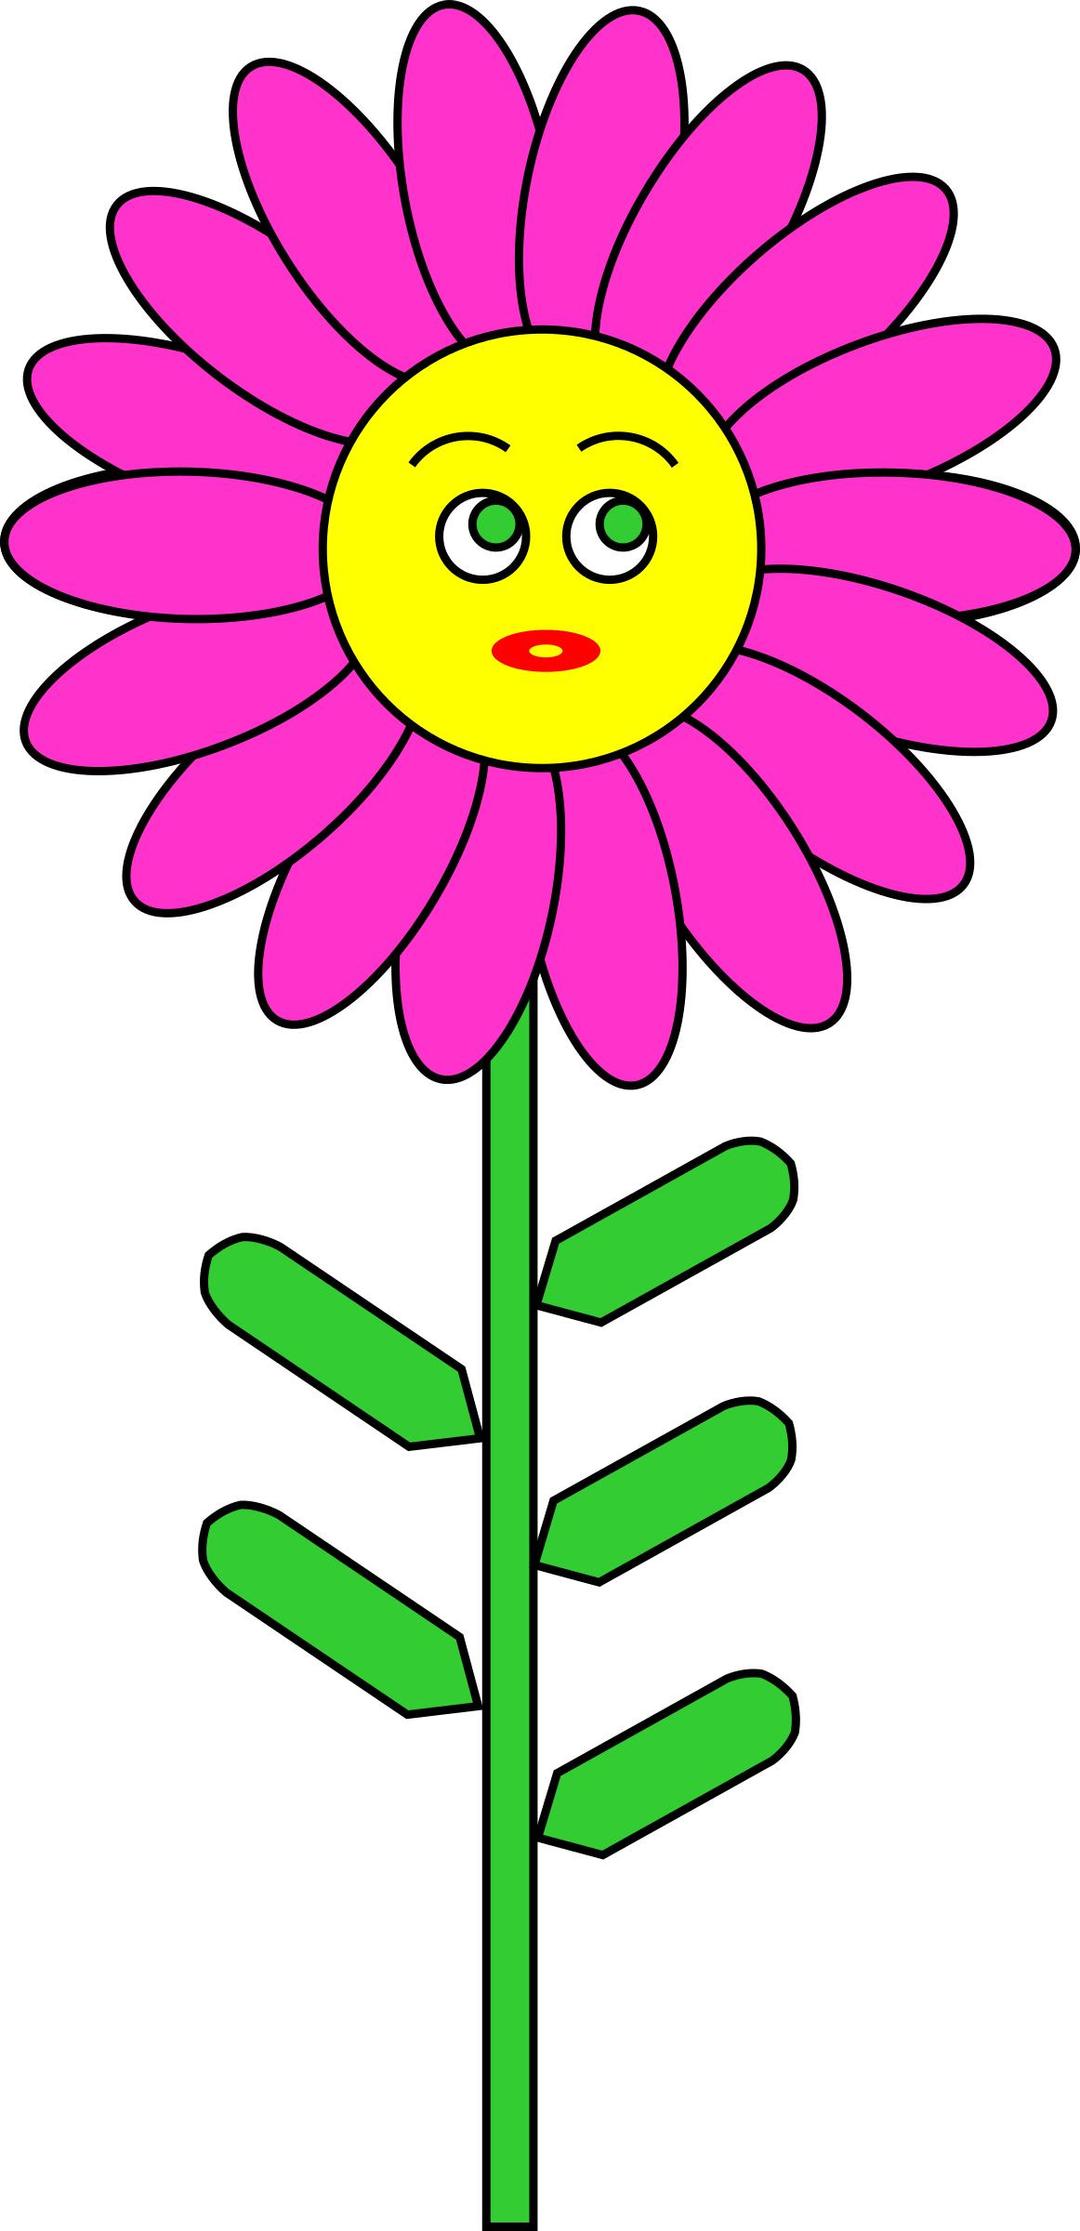 Purple Flower with smile png transparent